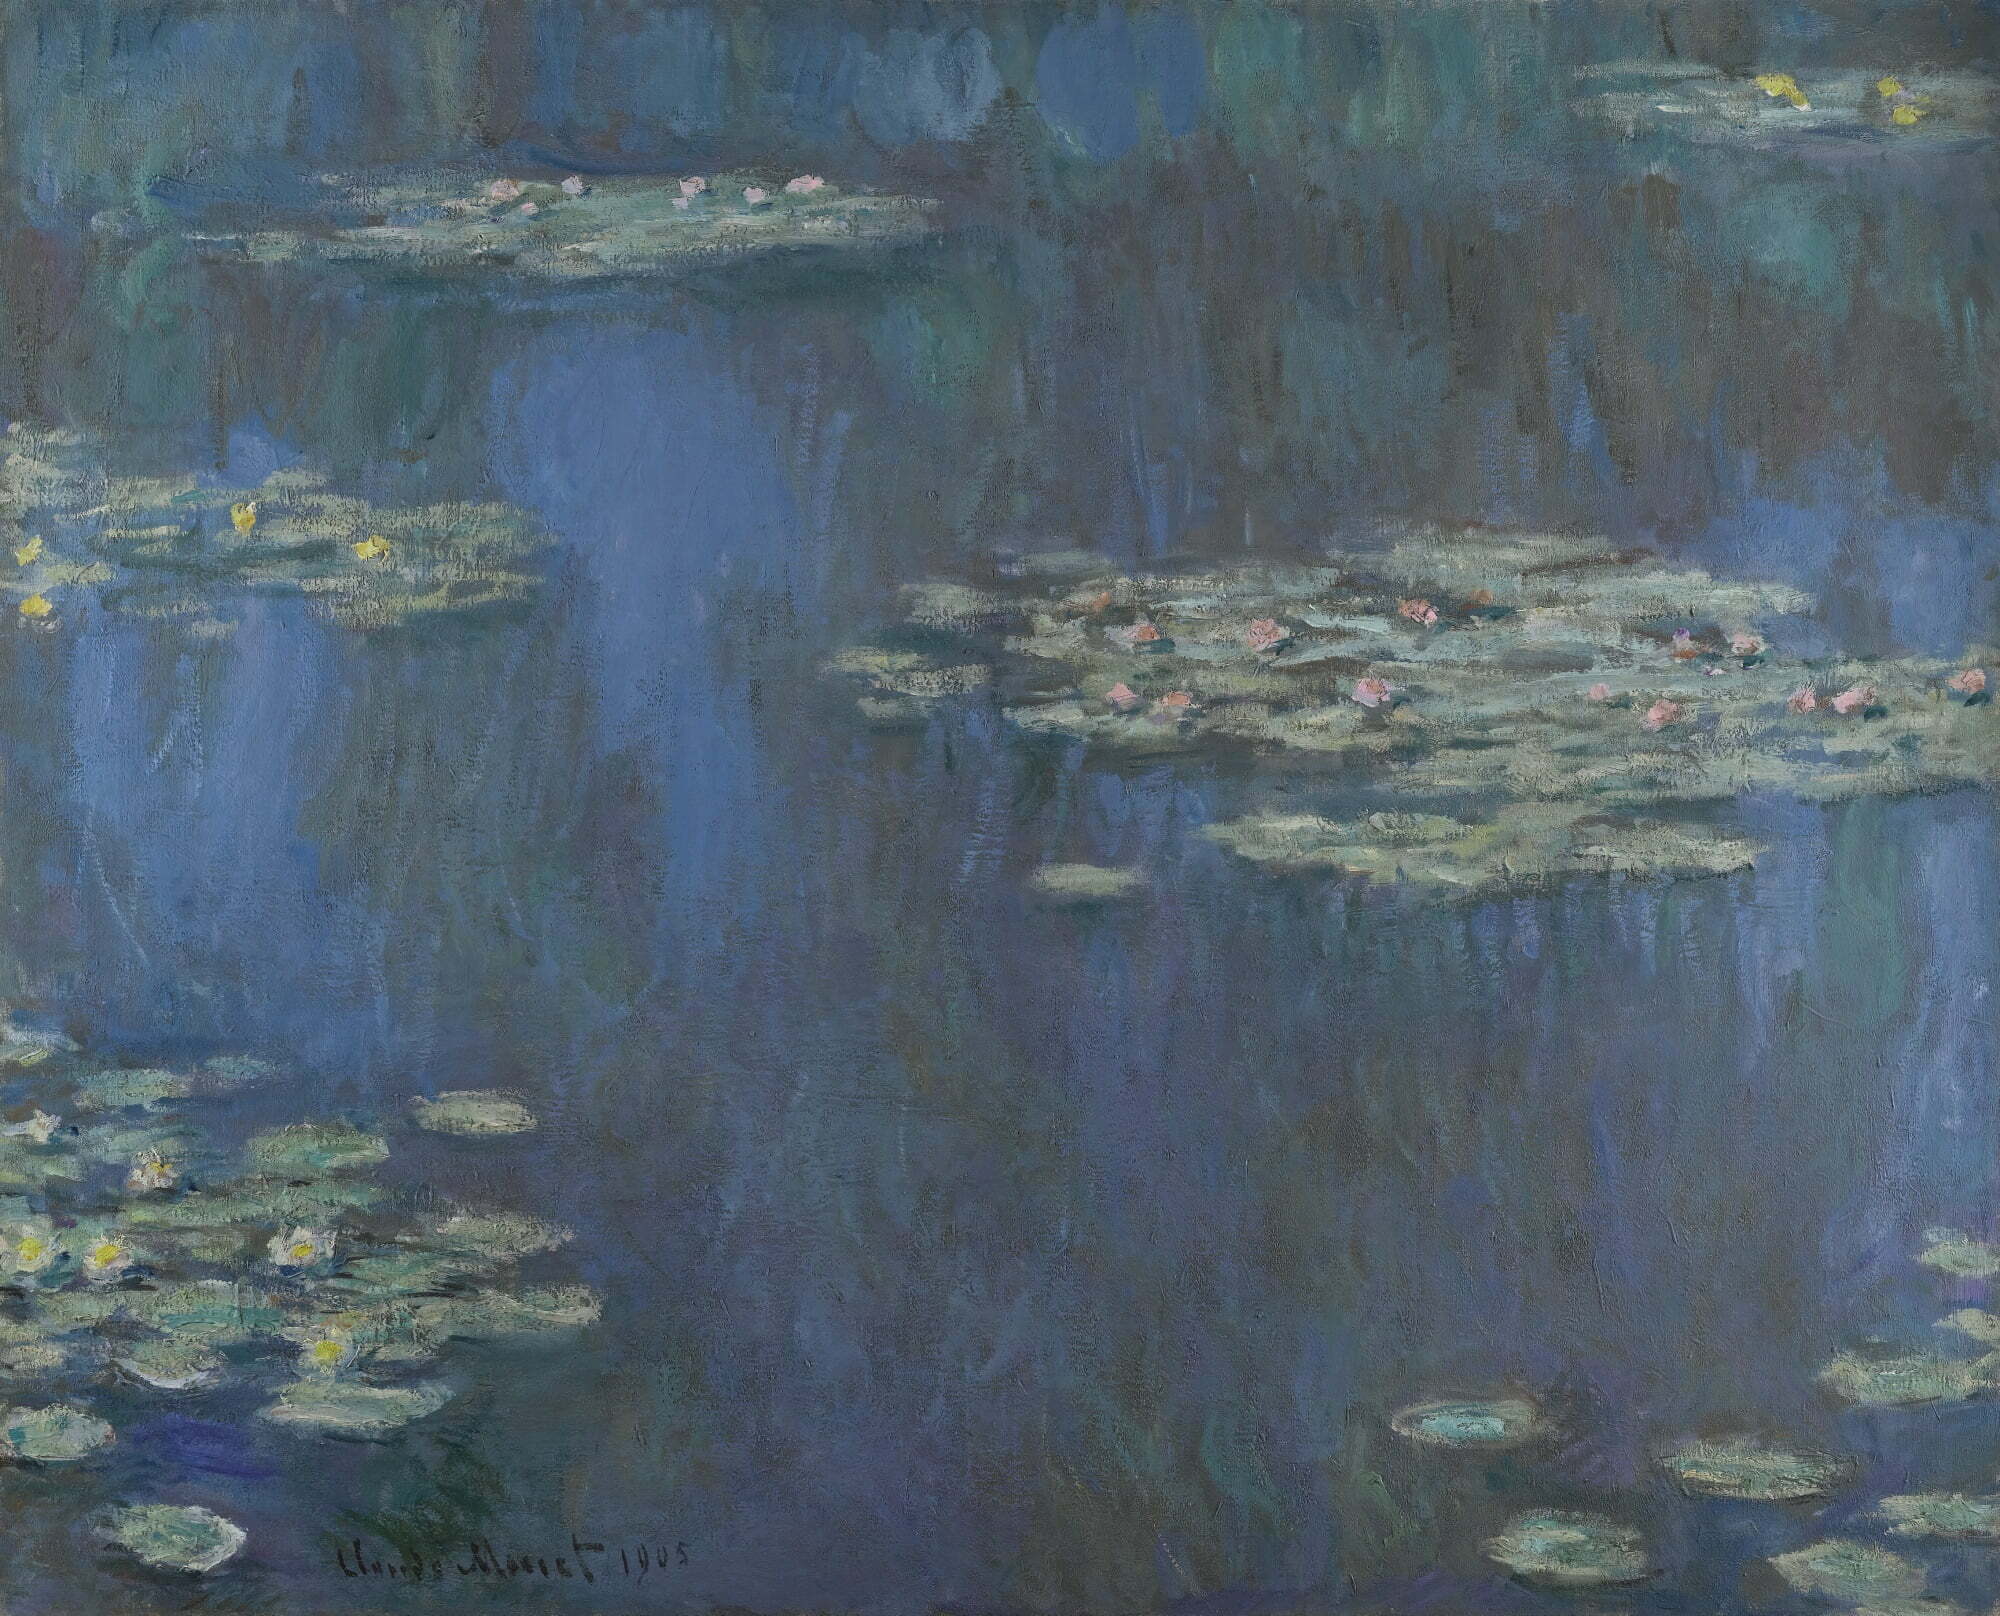 water lilies 2 - The Planners